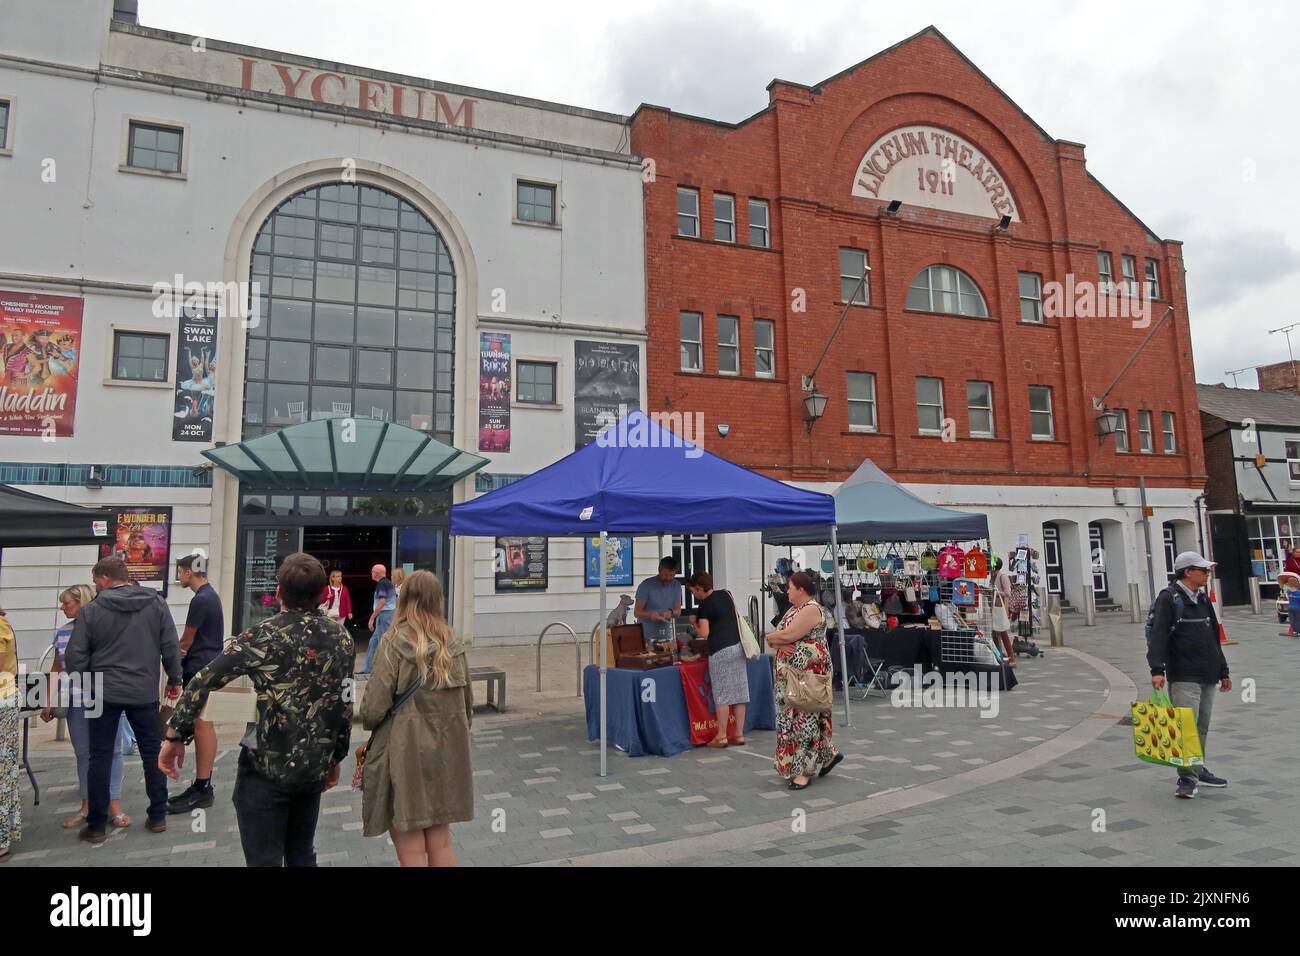 Crewe Lyceum theatre, opened 1911, with Saturday morning outdoor market stalls, Heath St, Crewe, Cheshire, England, UK,  CW1 2DA Stock Photo